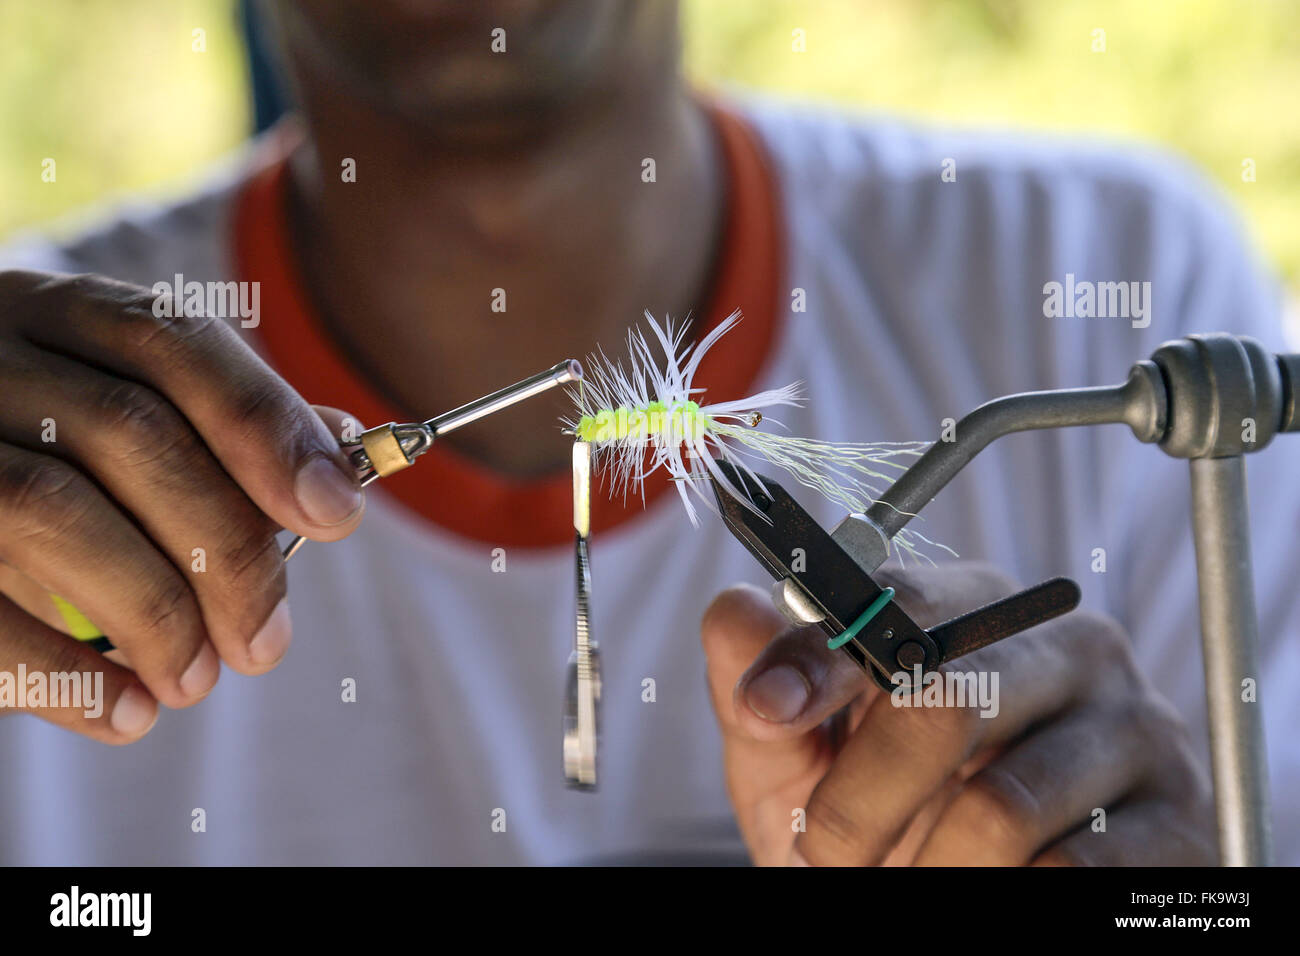 https://c8.alamy.com/comp/FK9W3J/fisherman-minutes-artificial-bait-known-as-fly-fishing-for-sport-called-FK9W3J.jpg